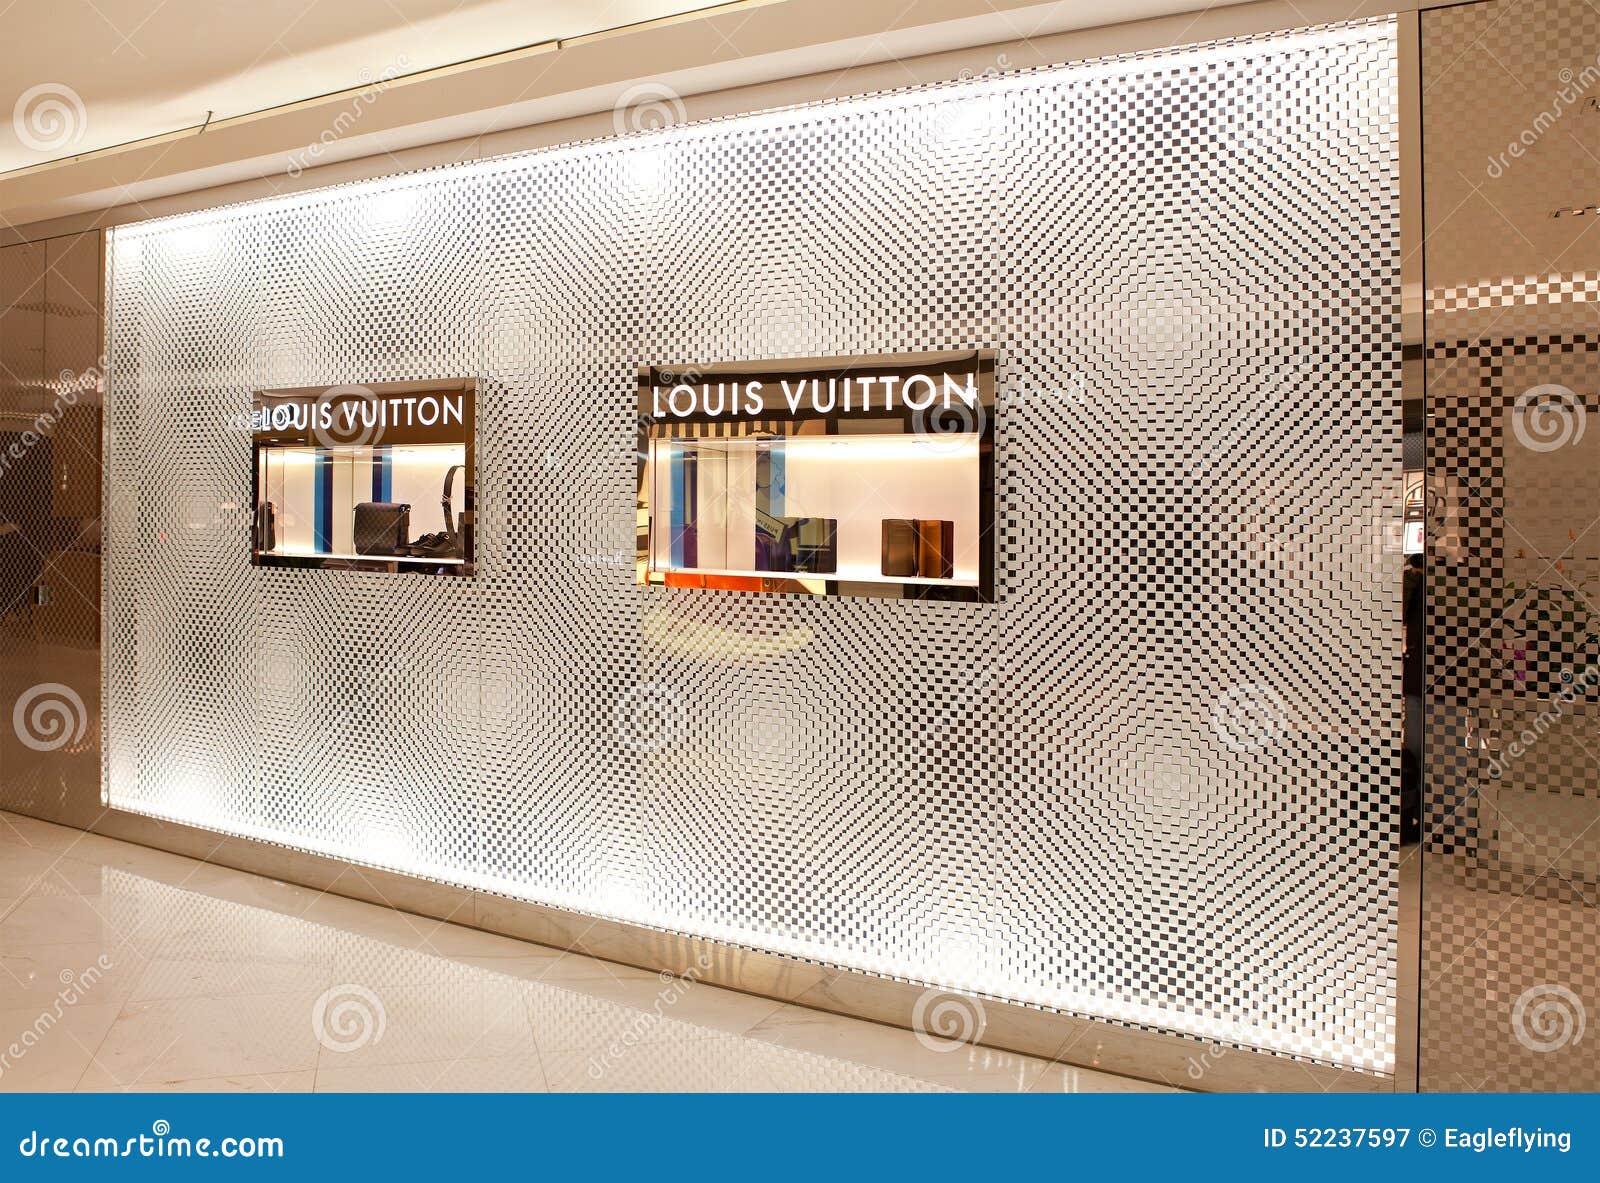 Who Owns The Brand Louis Vuitton Store